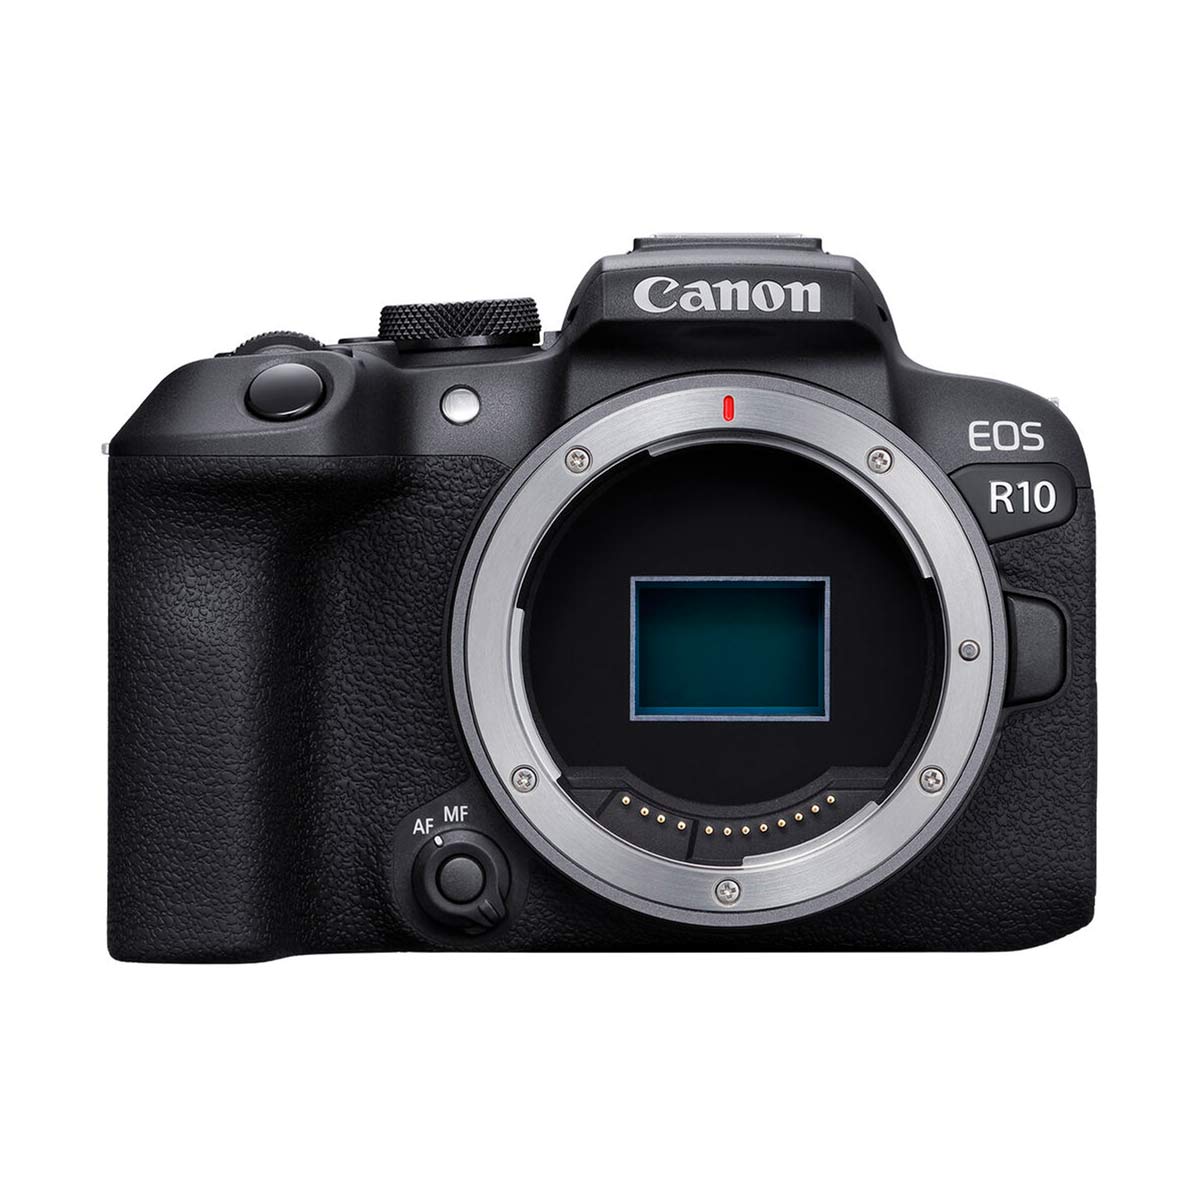 Canon EOS R10 Mirrorless Camera with RF-S 18-150mm Lens